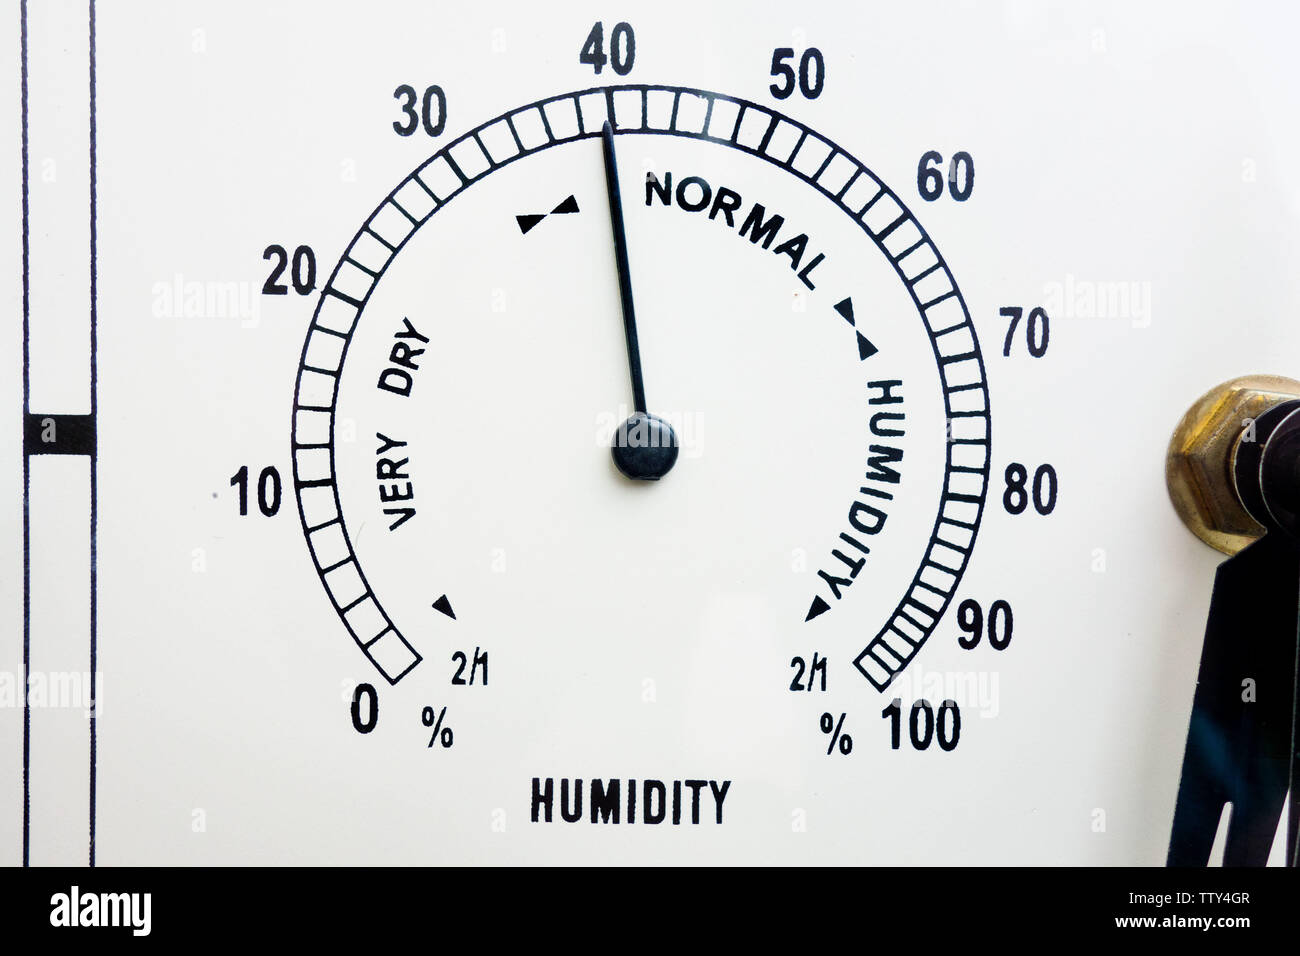 Measurement and control of humidity. Meteo weather indicator hygrometer face with black scale, needle and numbers. Closeup of analog device Stock Photo